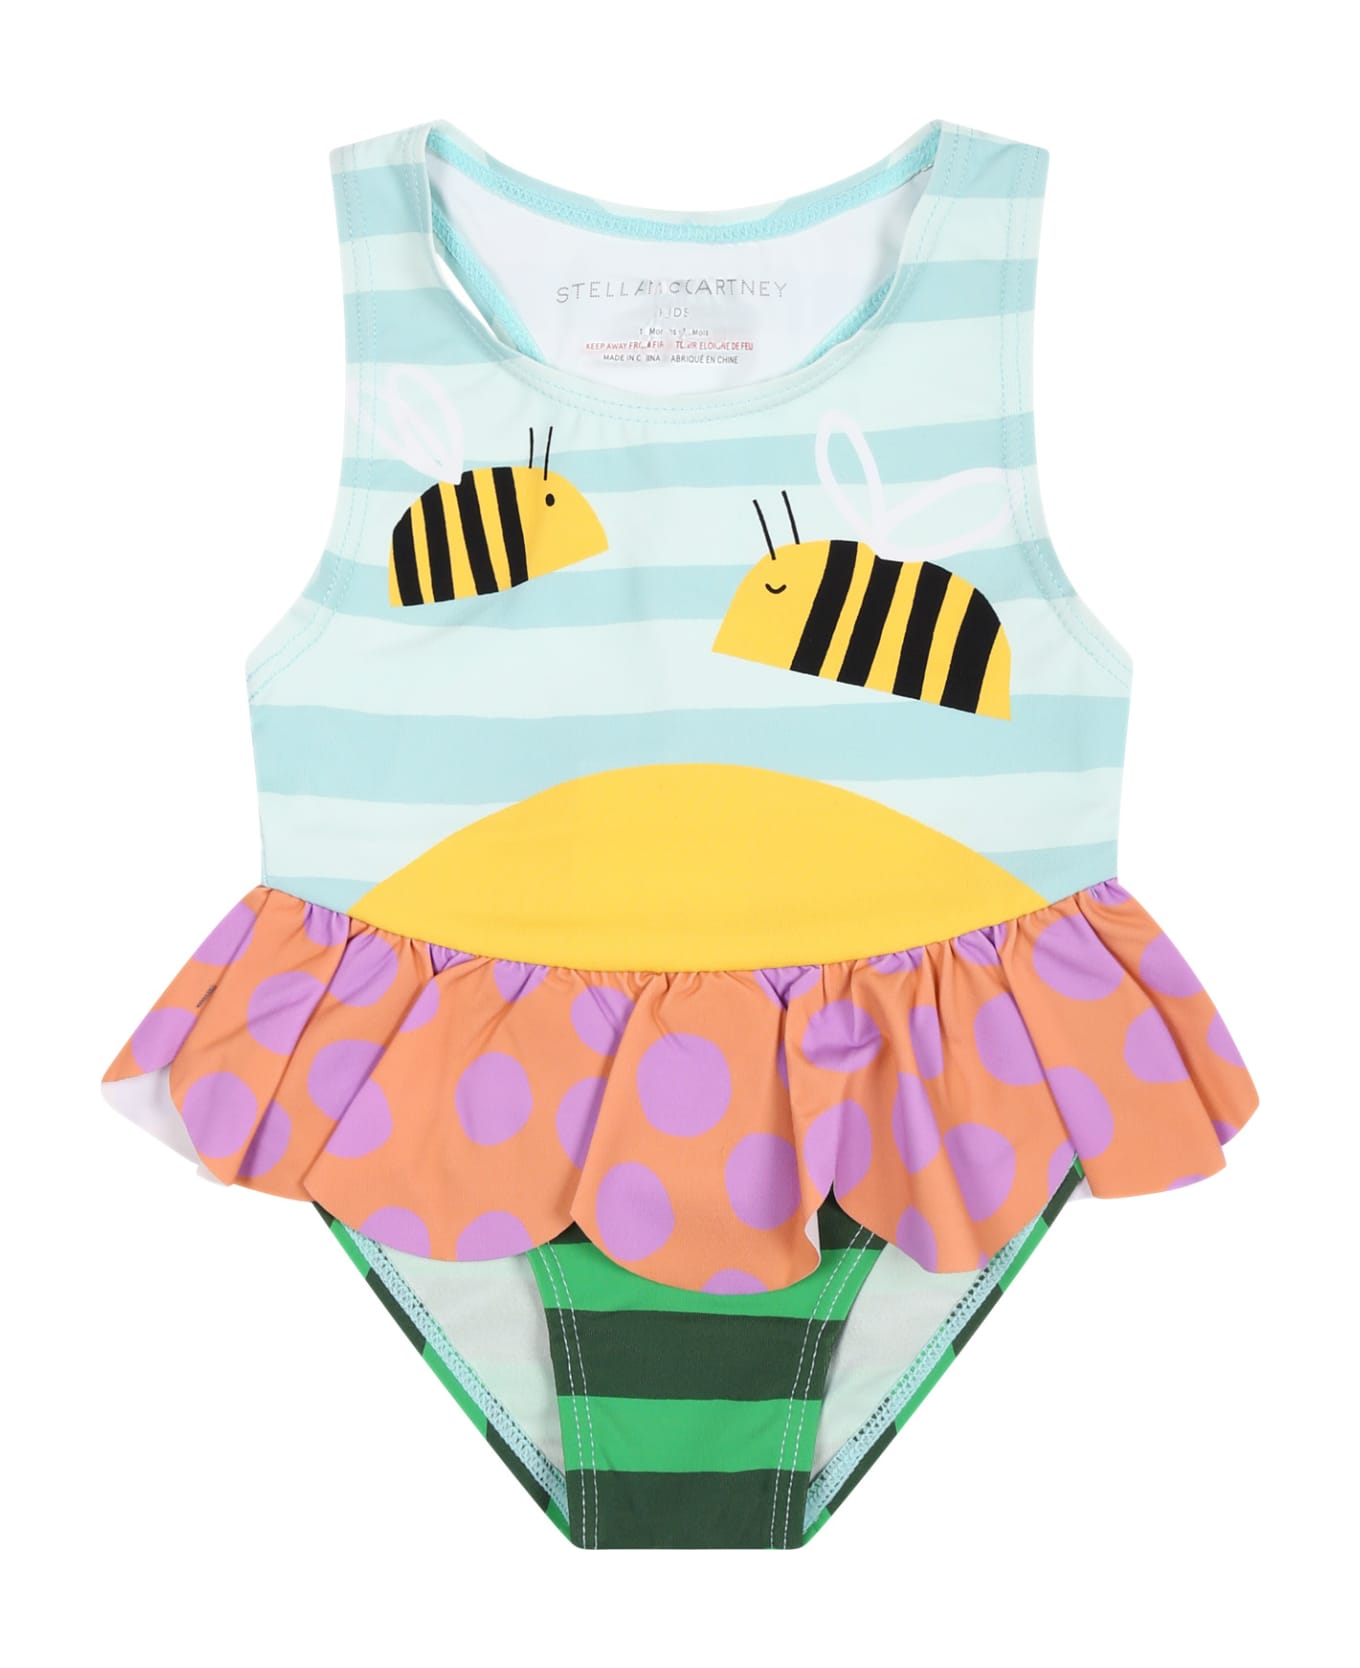 Stella McCartney Kids Light Blue Swimsuit For Baby Girl With Bees - Multicolor